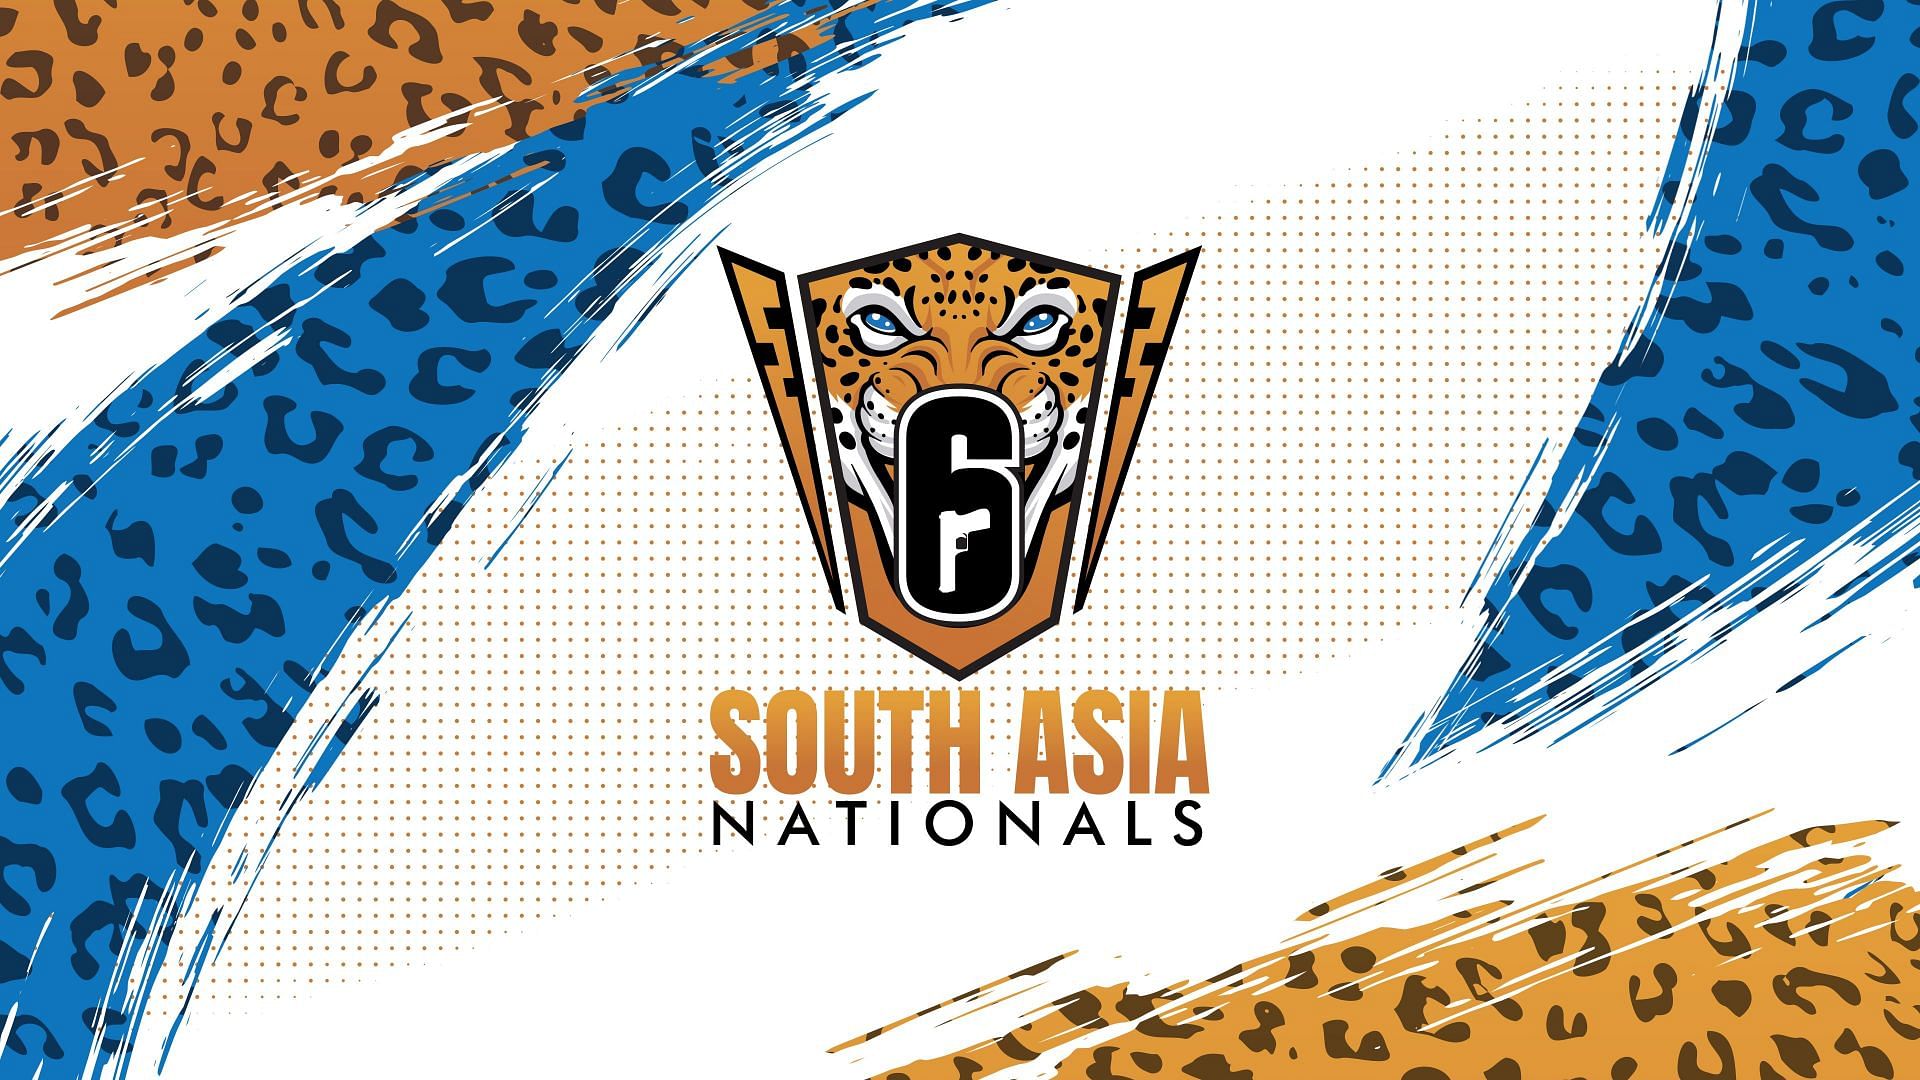 All the information on Rainbow Six Siege South Asia Nationals 2022 (Image via Ubisoft/The Esports Club)